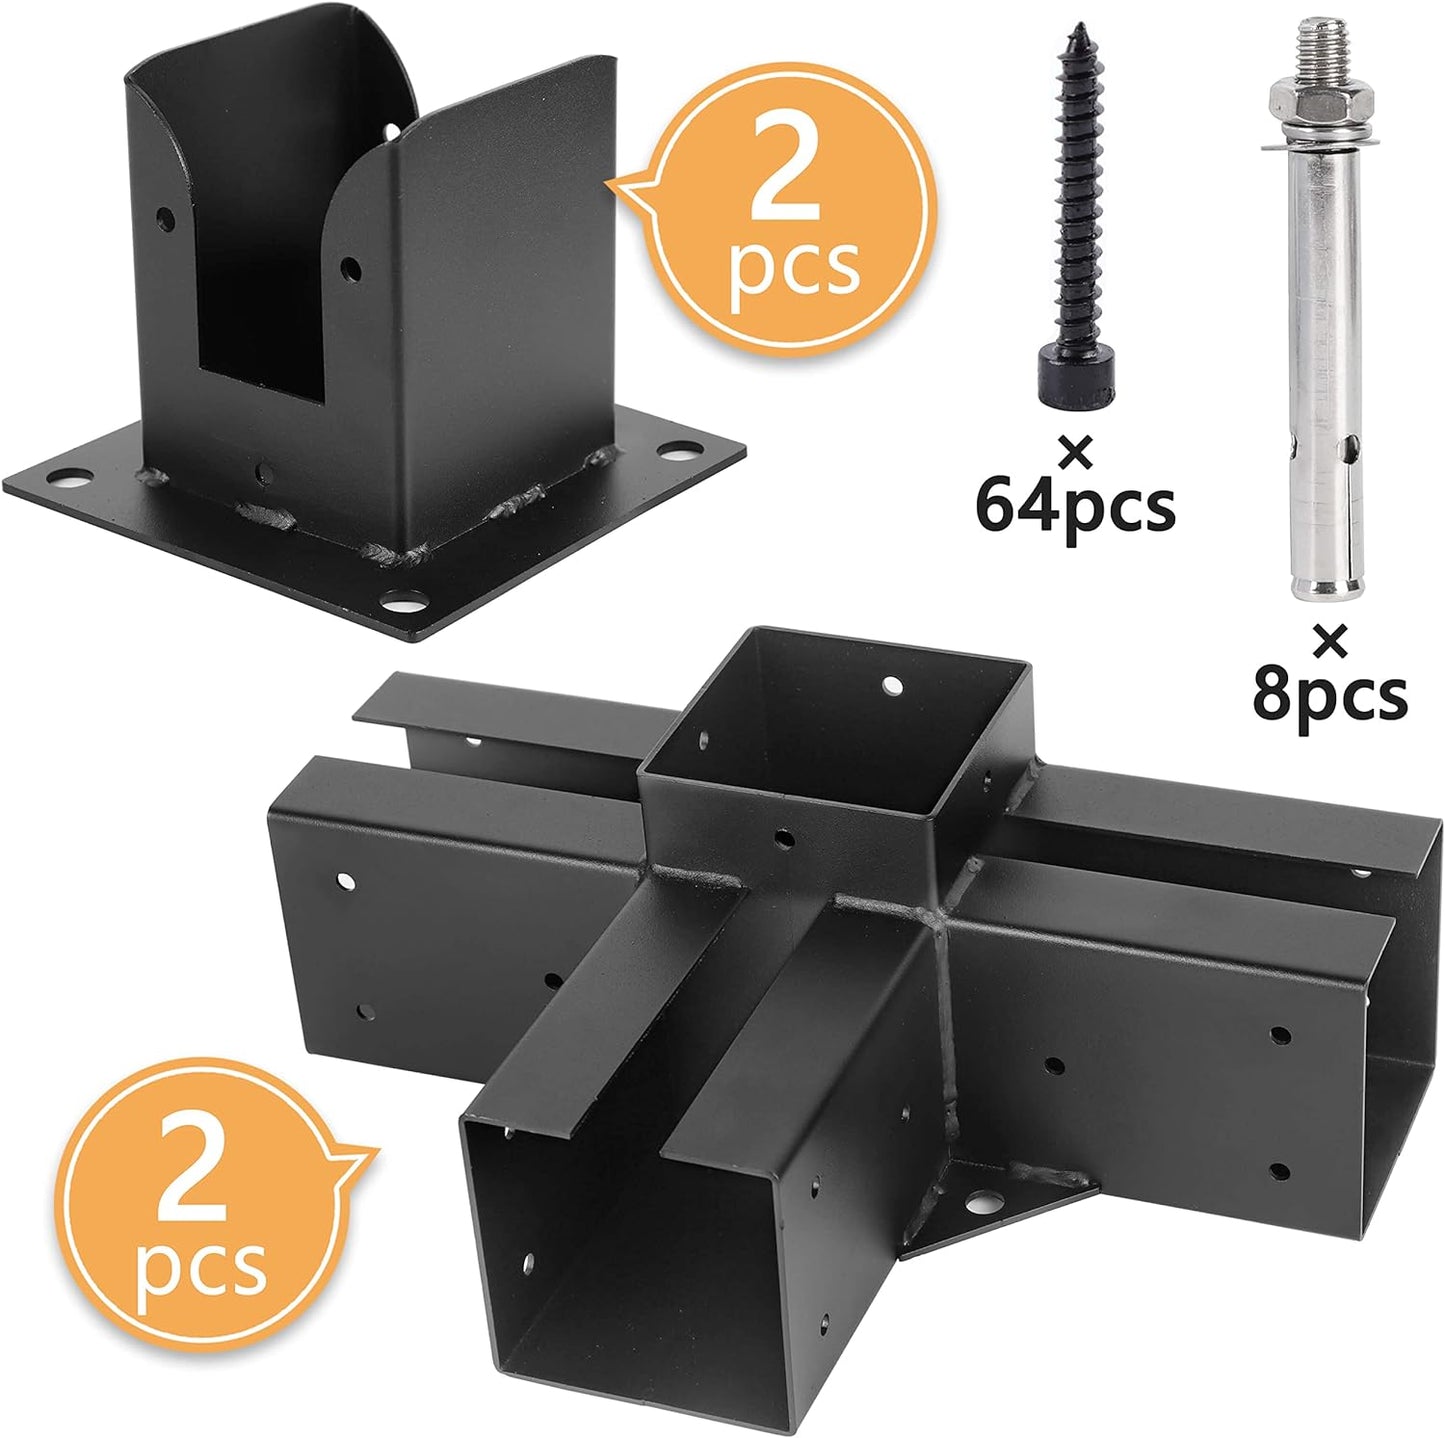 4x4 Post Base Stainless Steel - 4-Way Large Right Angle Corner Base Bracket Post Anchors with Screws for Wood Beams Lumbers